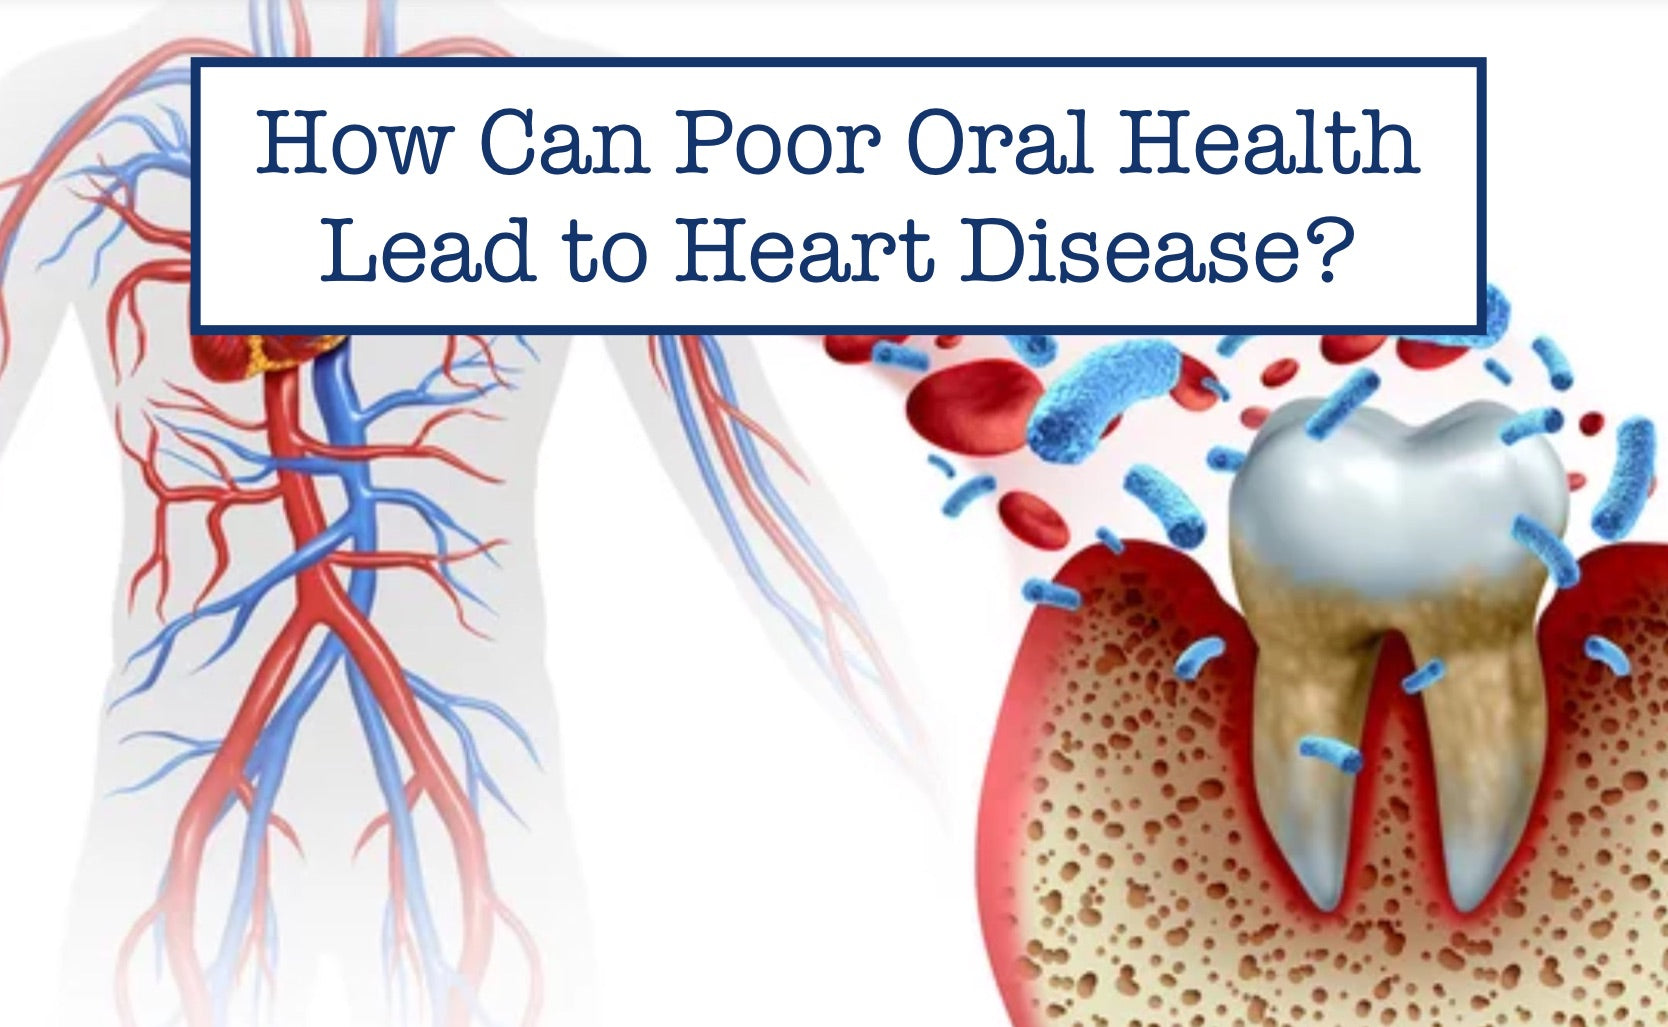 How Can Poor Oral Health Lead to Heart Disease